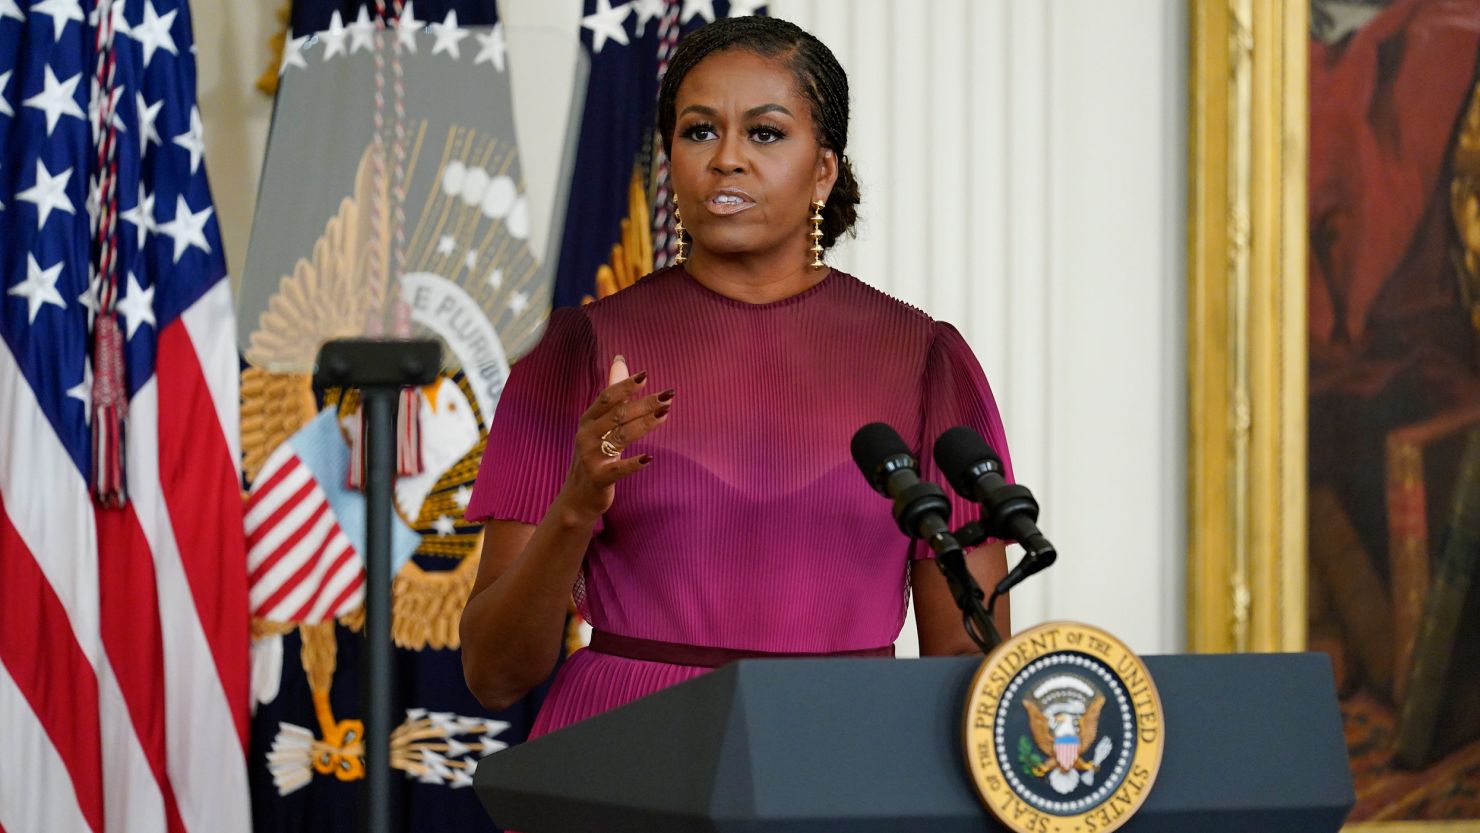 Former first lady Michelle Obama speaks during a ceremony in the East Room of the White House, Wednesday, Sept. 7, 2022, in Washington. Former President Barack Obama and the former first lady unveiled their official White House portraits during the ceremony. 